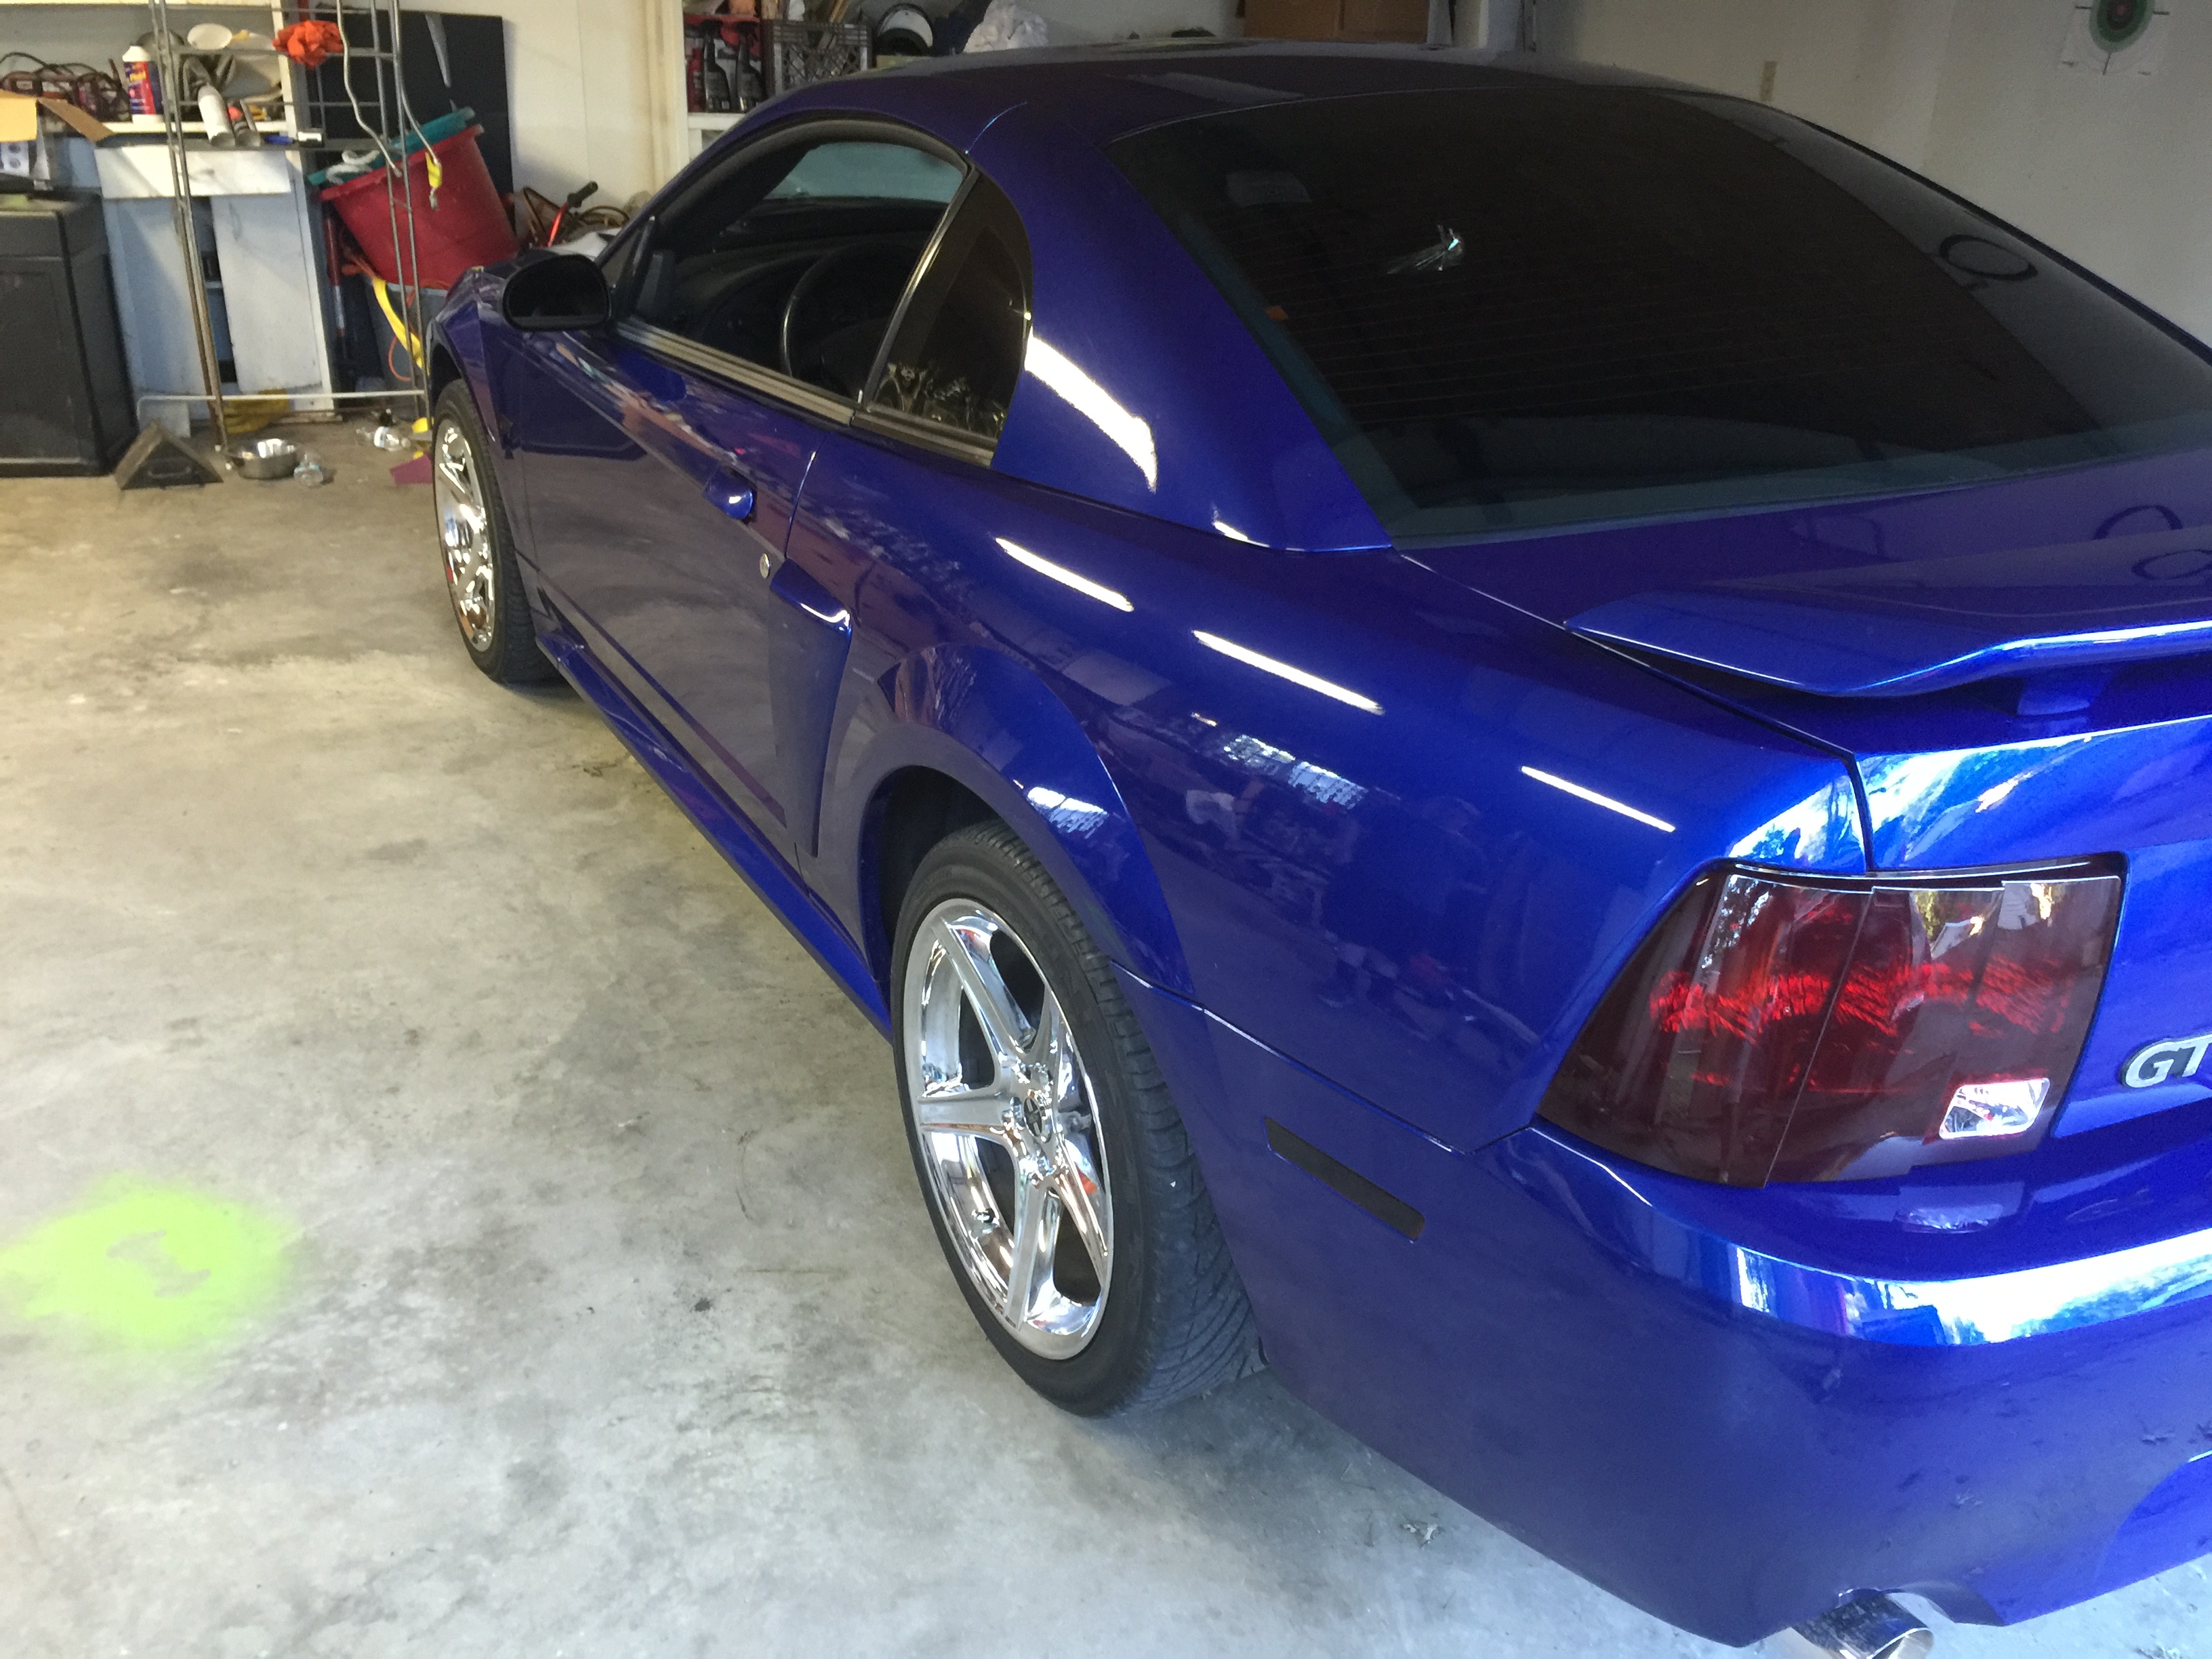 2004 Ford Mustang GT, Springfield, IL. Mobile dent removal http://217dent.com